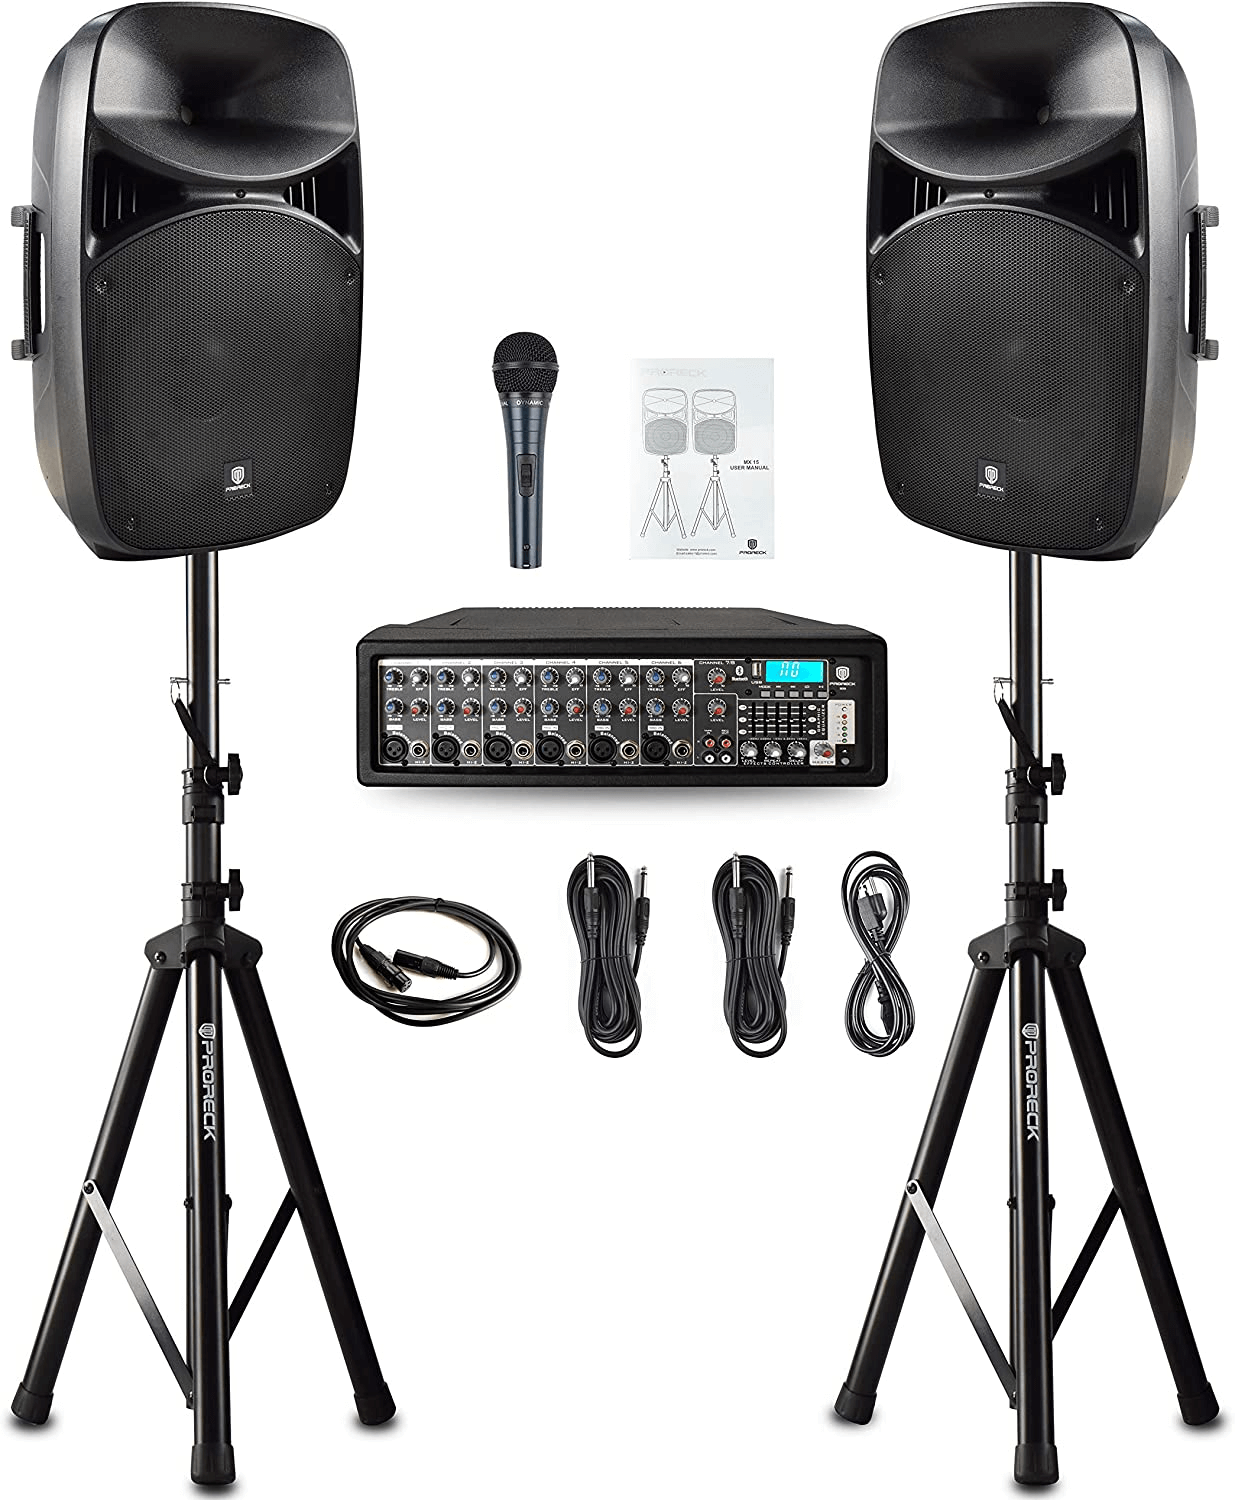 PRORECK Speaker MX15 15inch 2500W 8 Channel Bluetooth Powered PA System Mixer